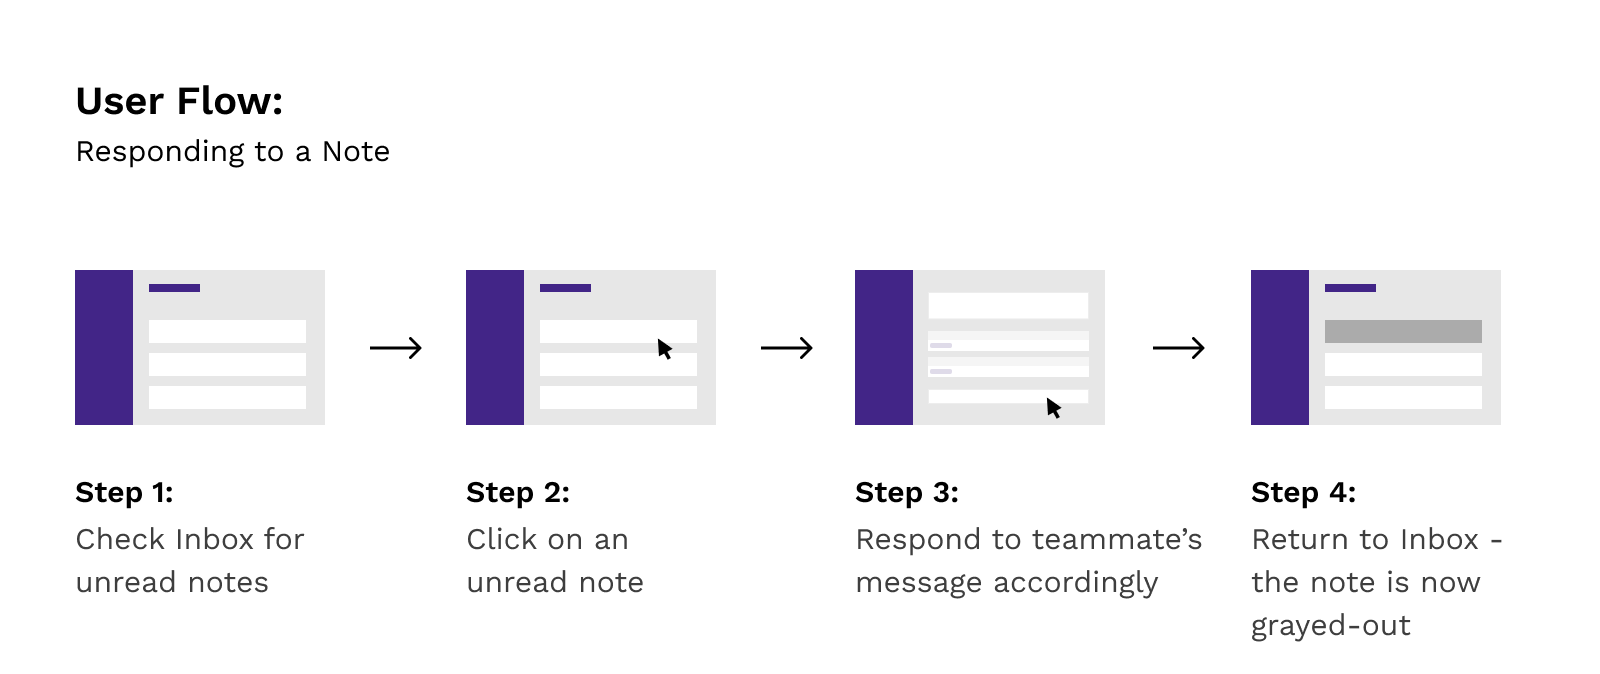 User Flow - Responding to a Note